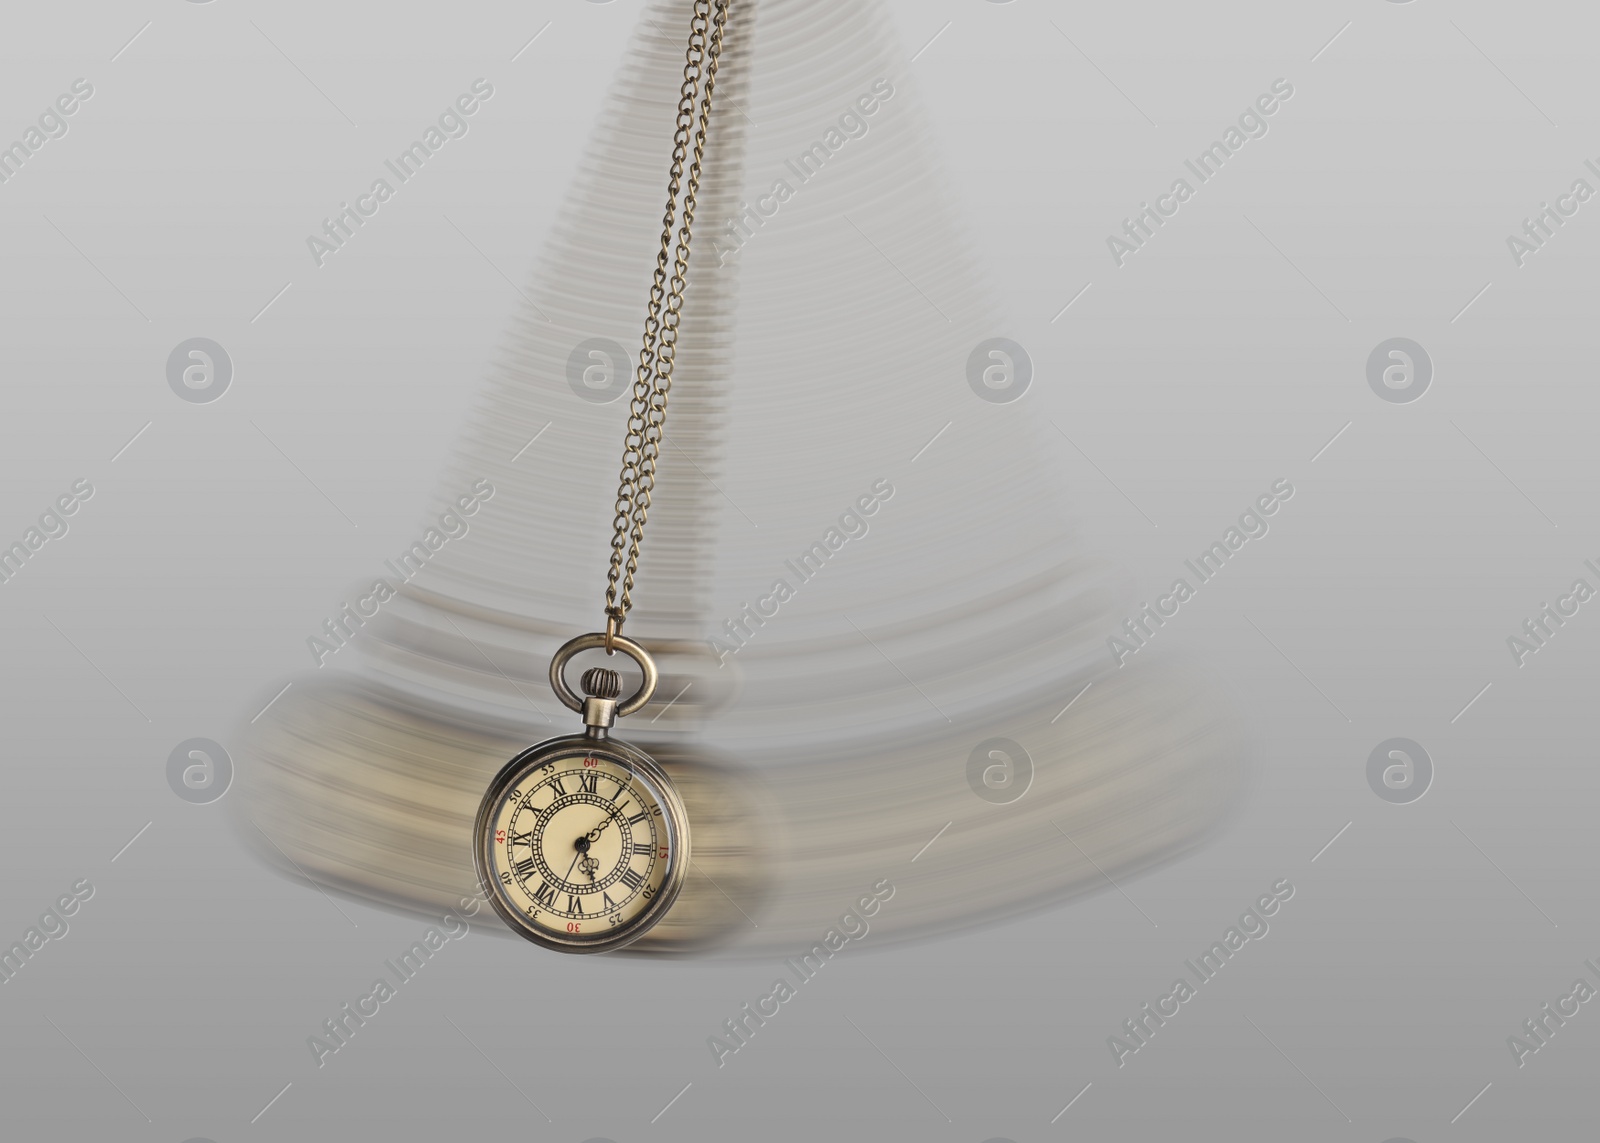 Image of Hypnosis session. Vintage pocket watch with chain swinging on light background, motion effect